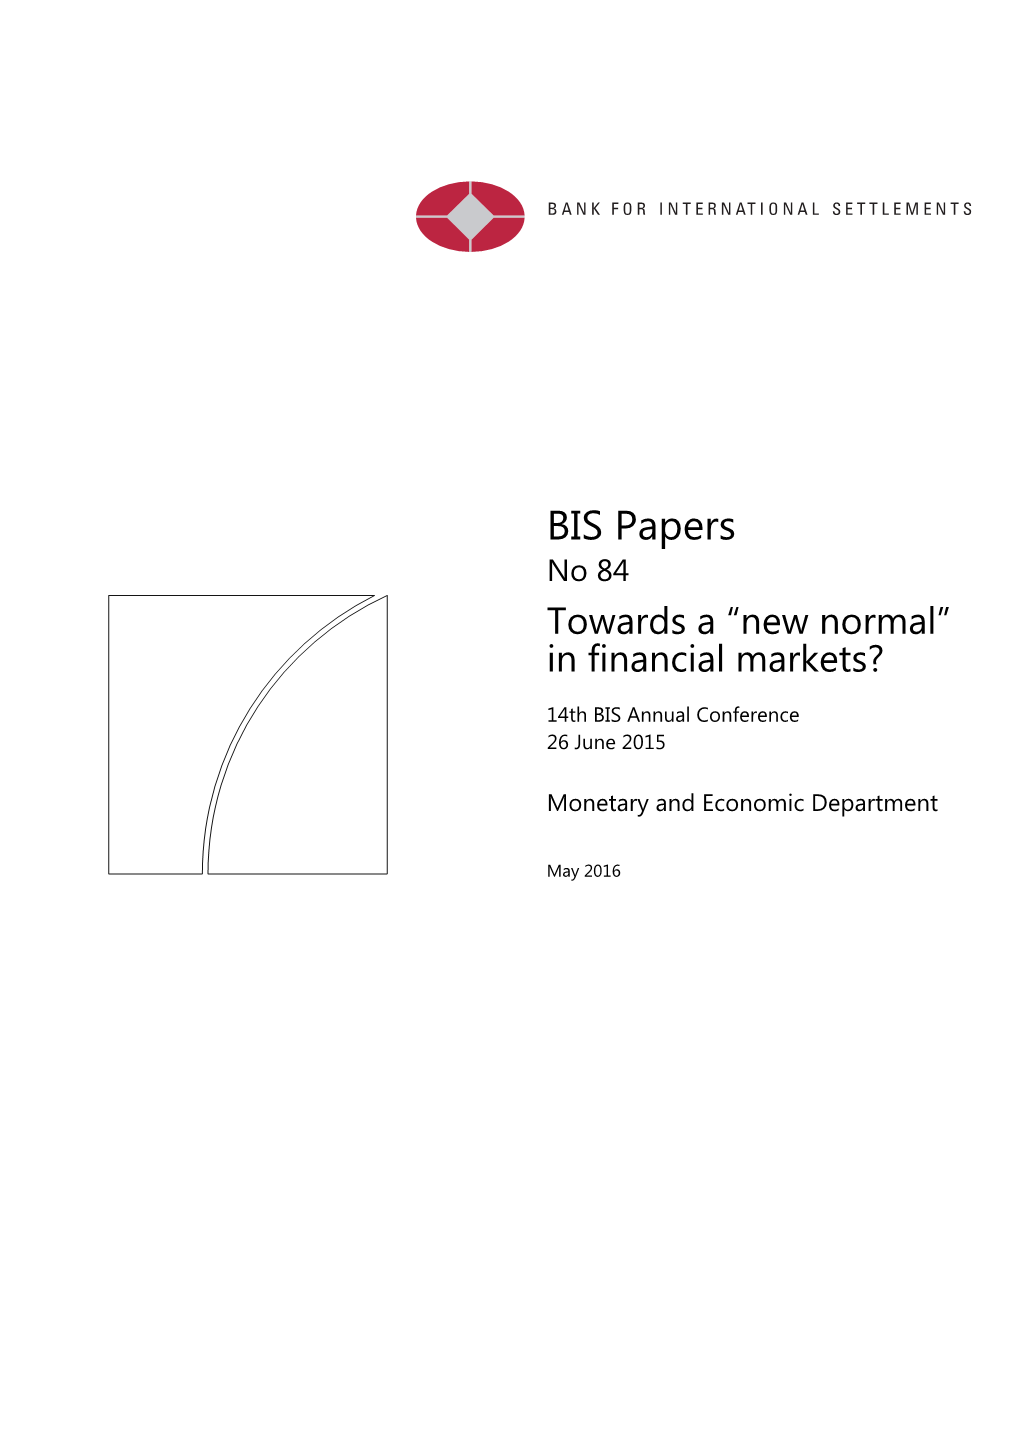 BIS Papers No 84 Towards a “New Normal” in Financial Markets?